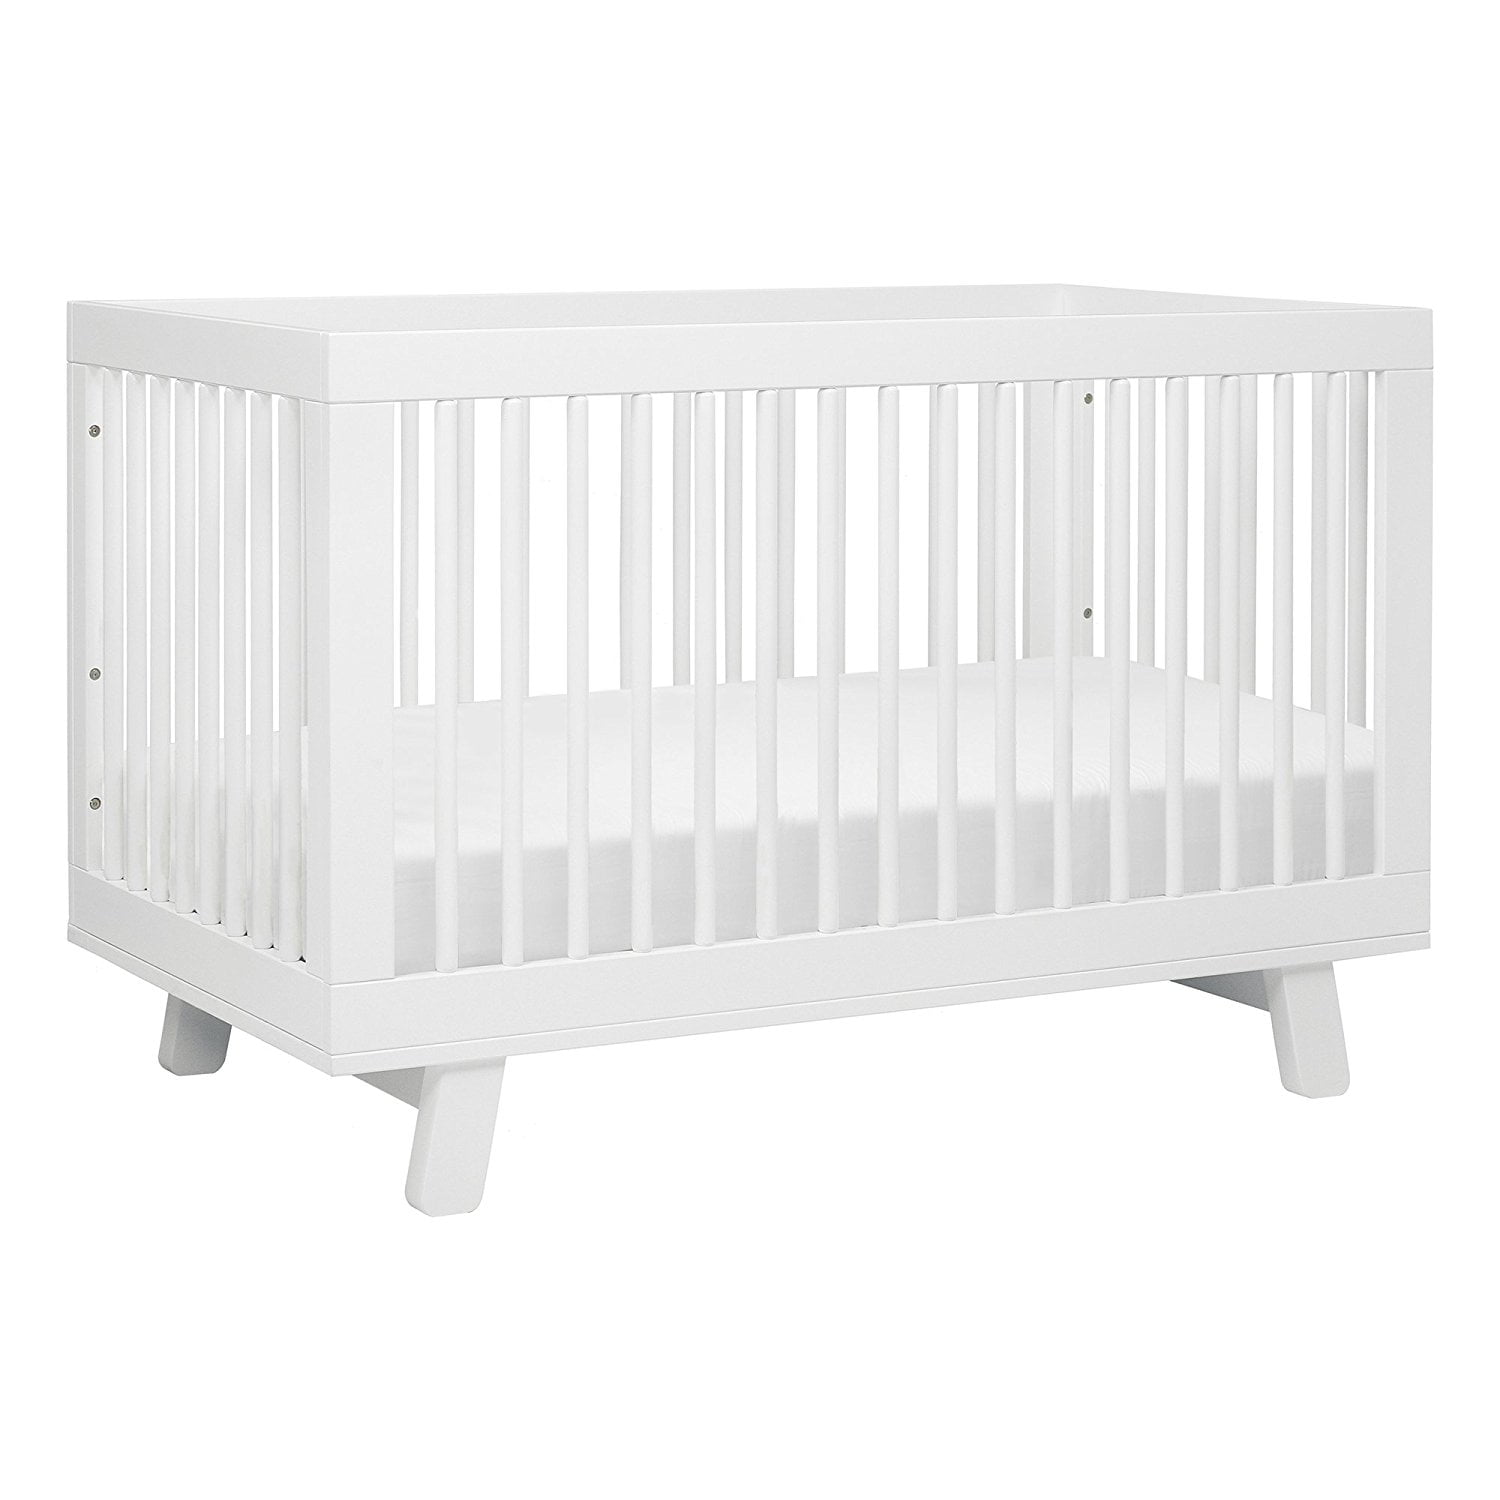 White Baby Cot Bed with Mattress Included Wooden Baby Crib 124x64.5x84cm with Storage Drawer & Foam Mattress & 3 Position Height Adjustable Convertible Cots Baby Bed Junior Bed for Baby Toddler